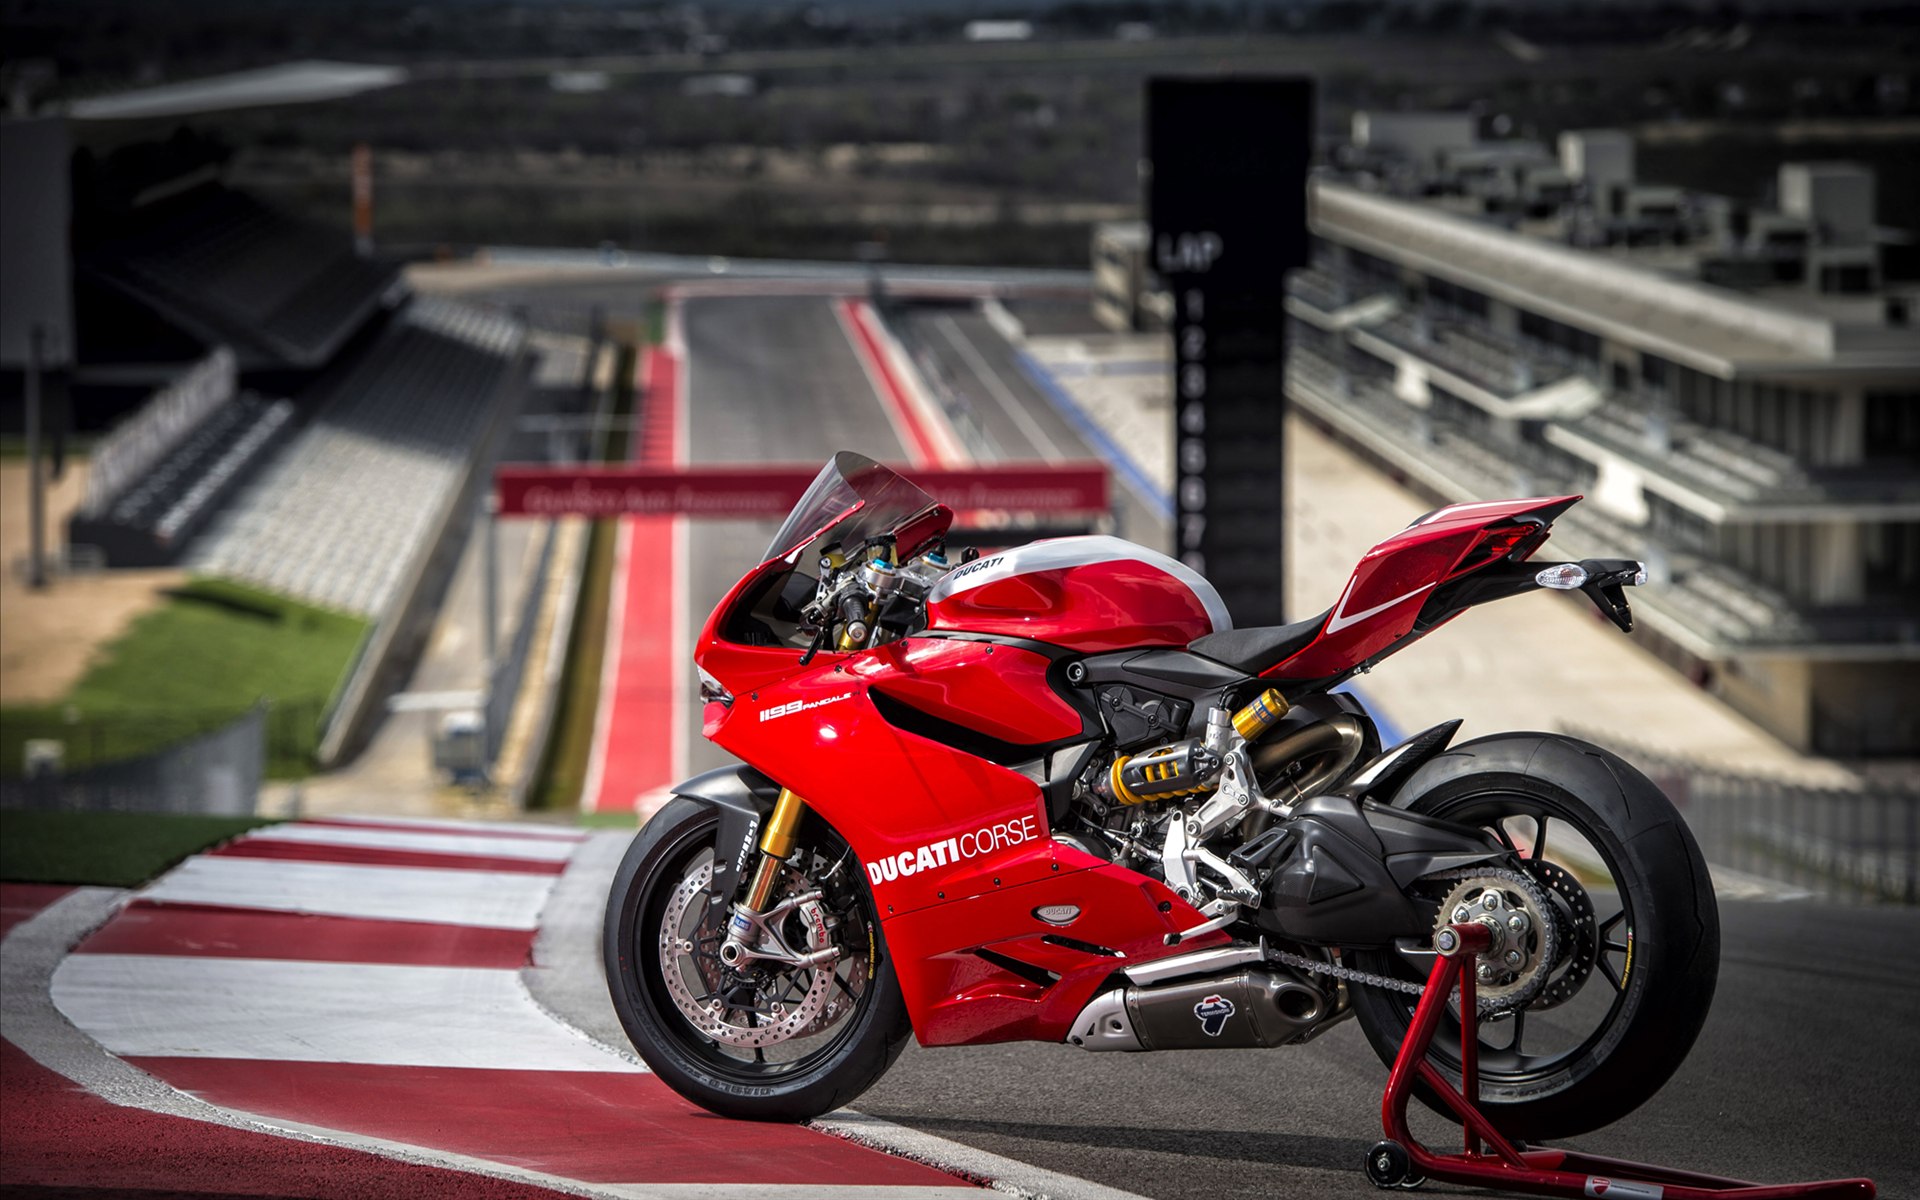 2013 Ducati Superbike 1199 Panigale R Wallpapers HD Wallpapers